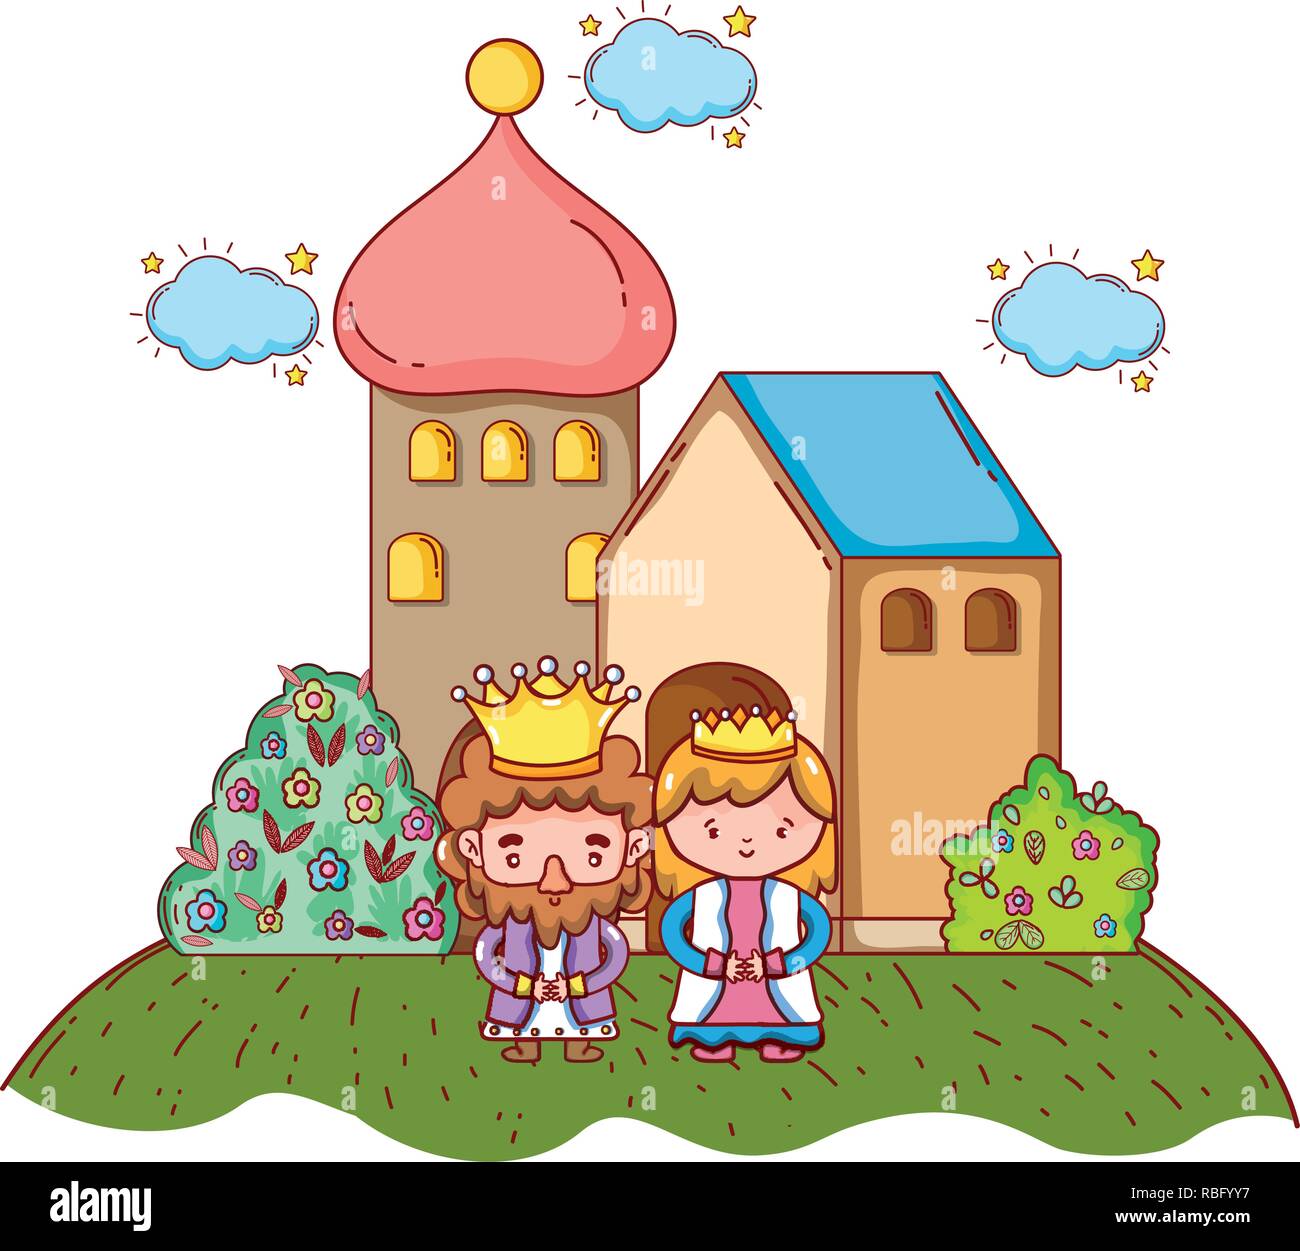 Holy Family Of Nazareth Stock Vector Images - Alamy